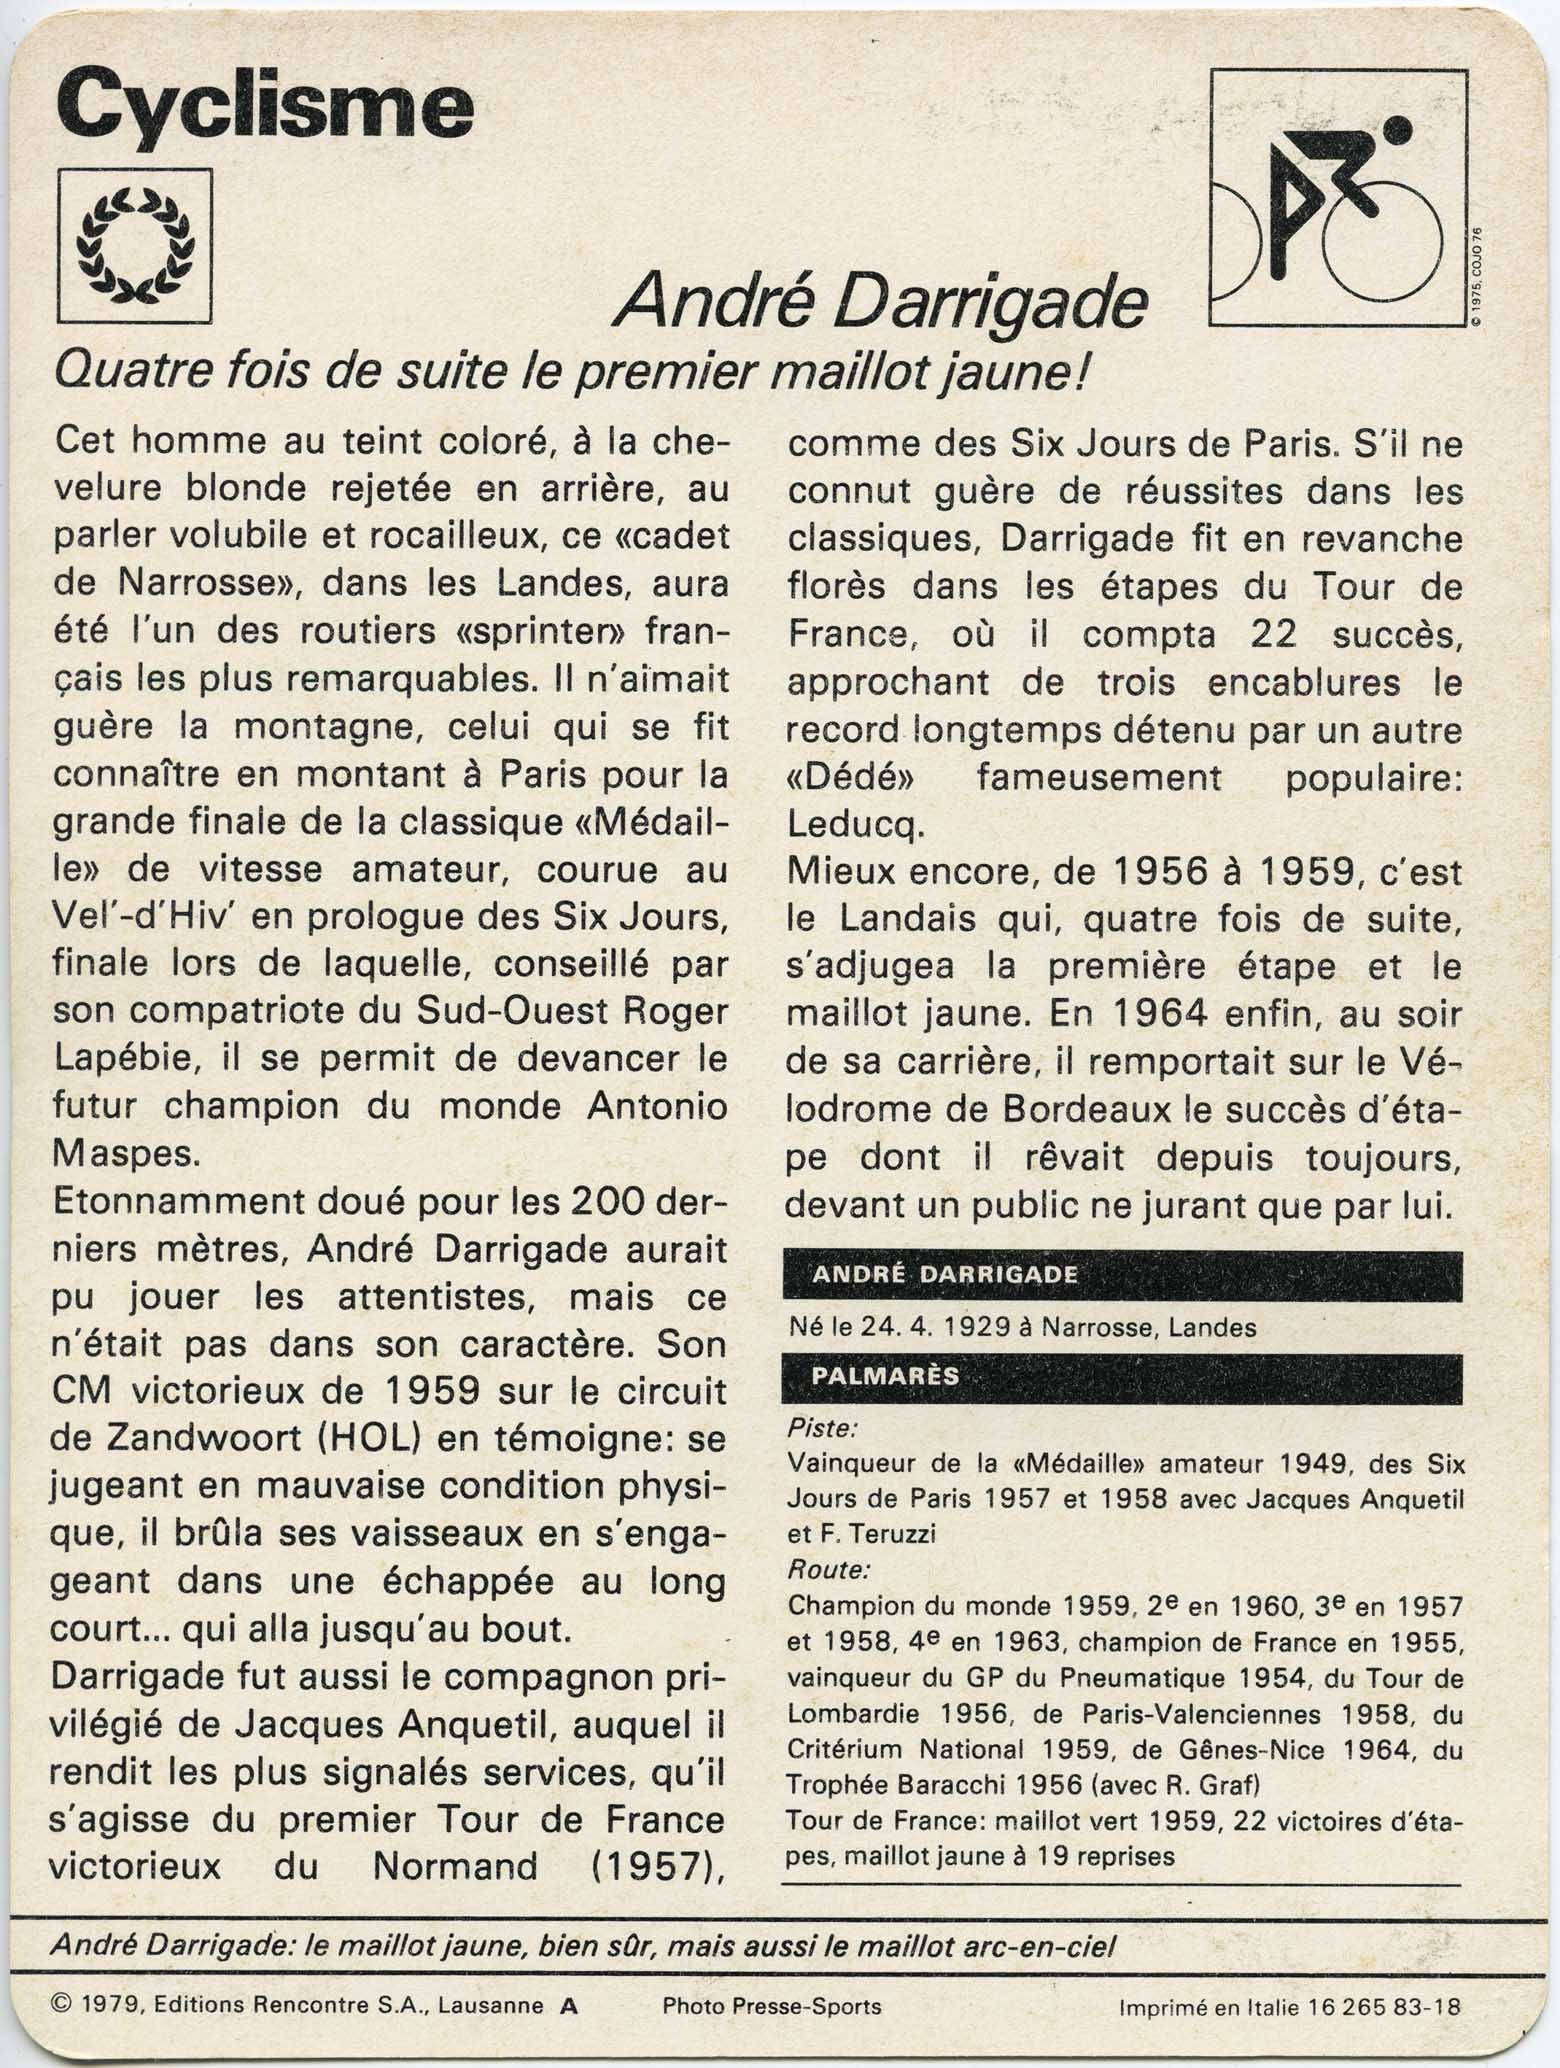 Editions Rencontre - Andre Darrigade scan 2 main image